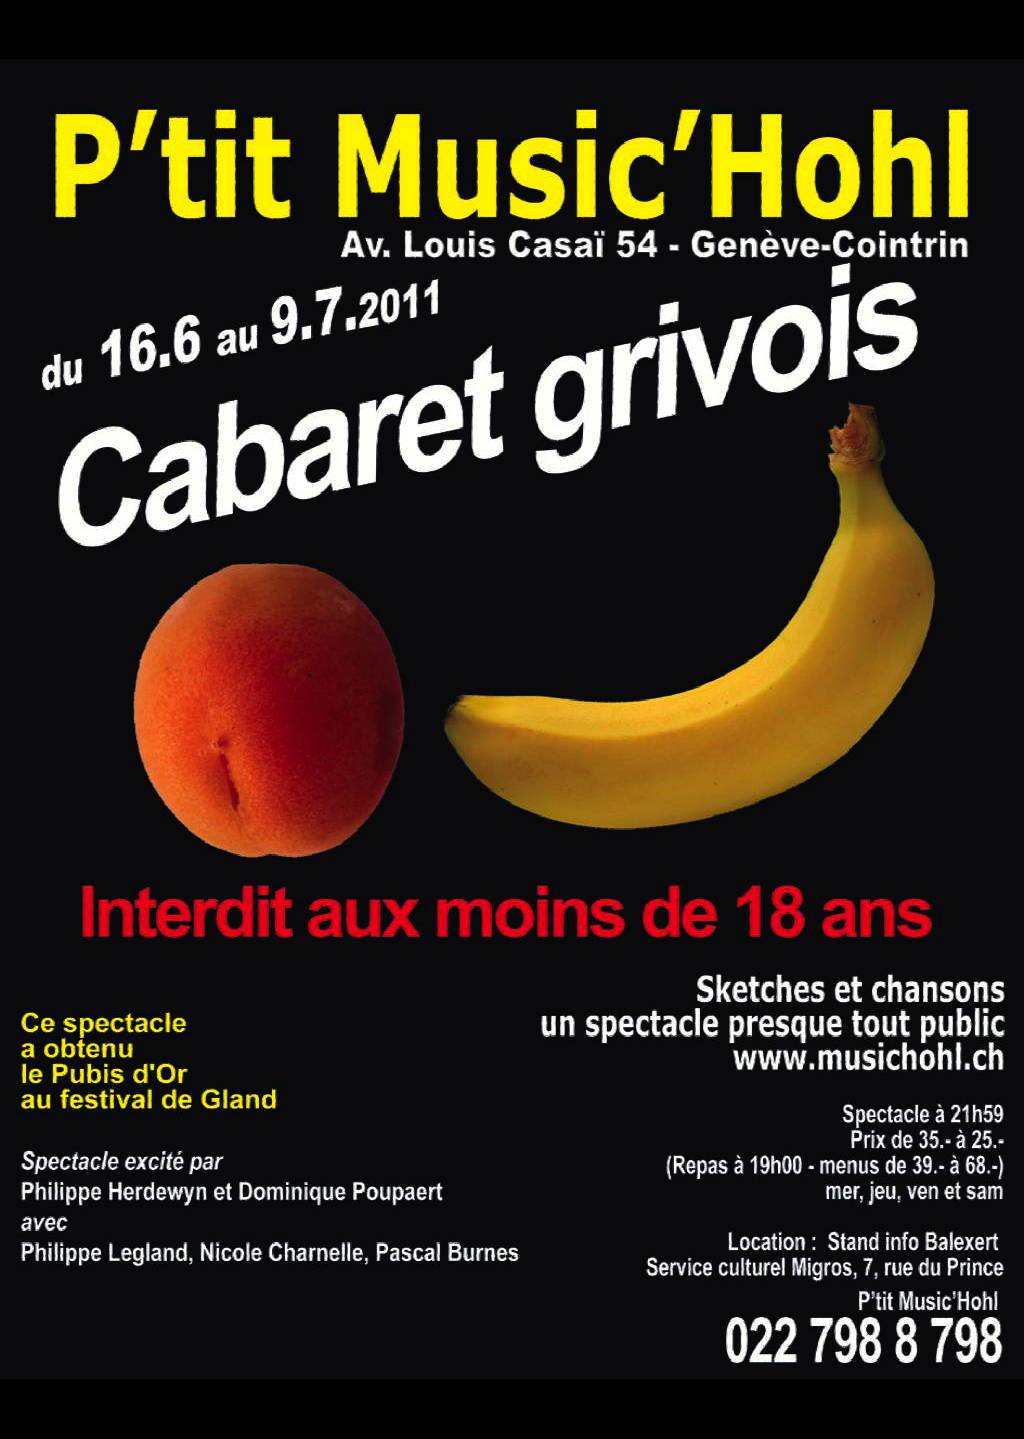 Spectacle grivois 2011